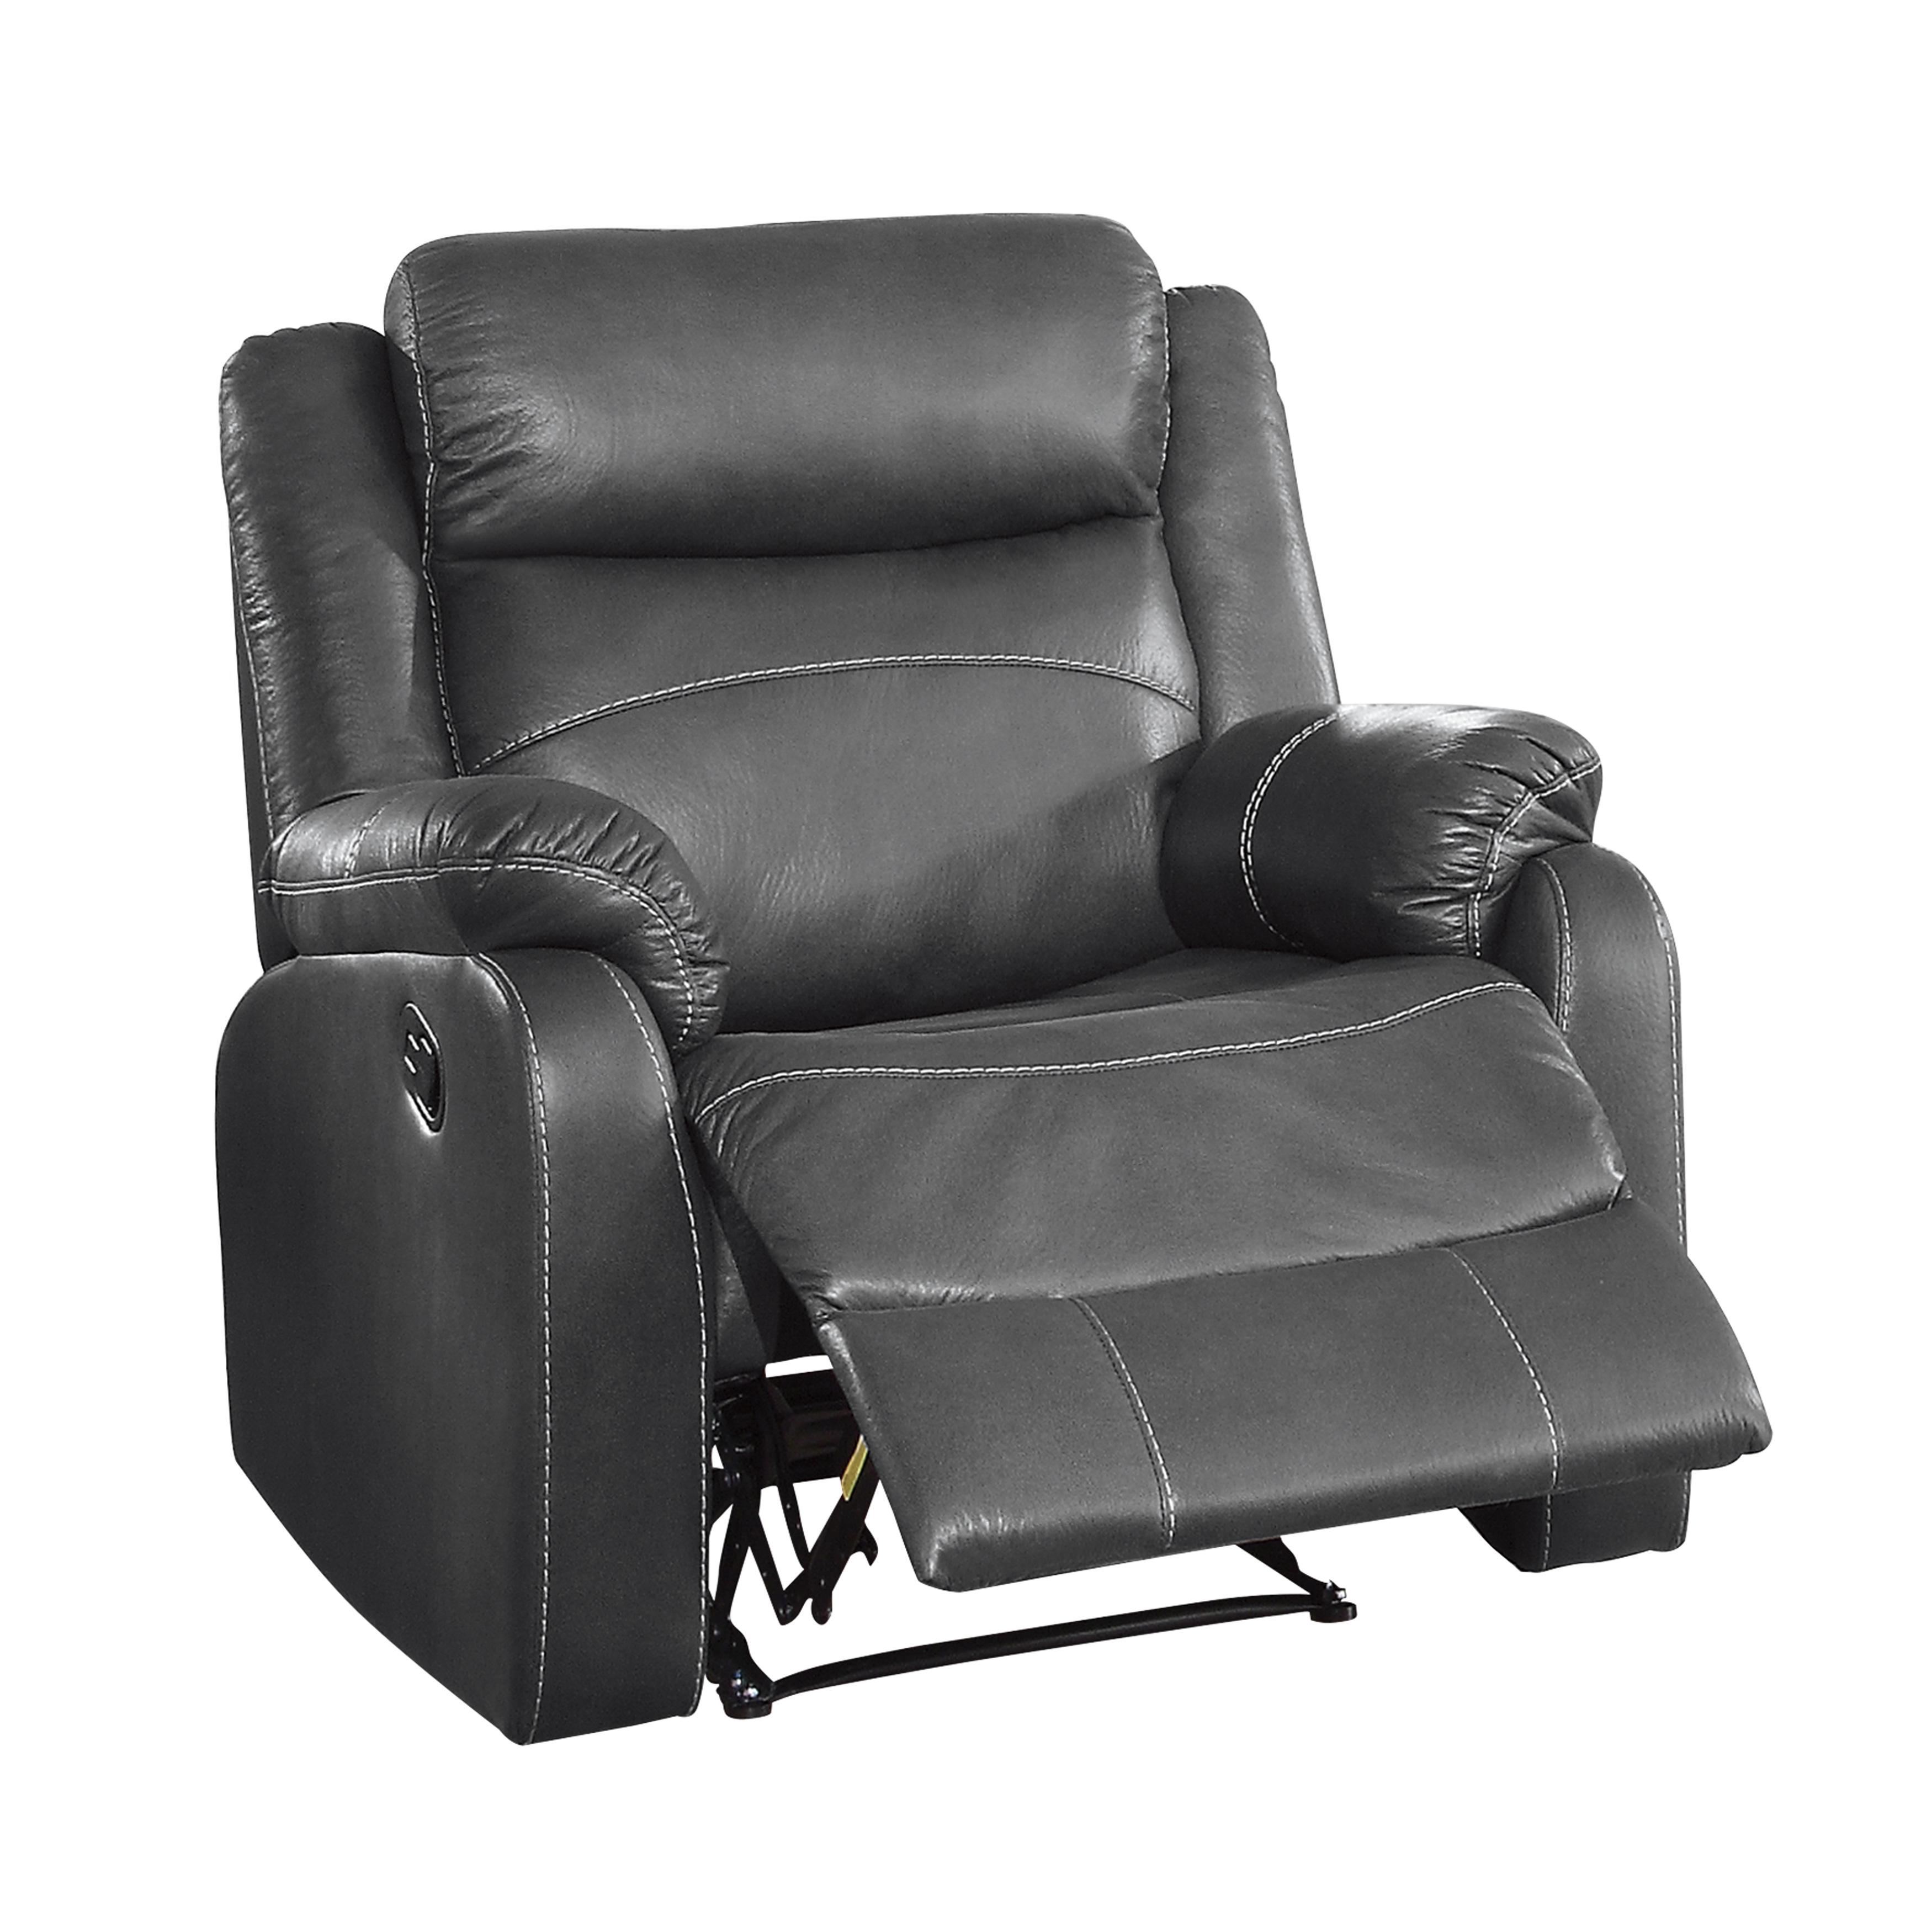 Transitional Reclining Chair Yerba Reclining Chair 9990GY-1-C 9990GY-1-C in Gray 